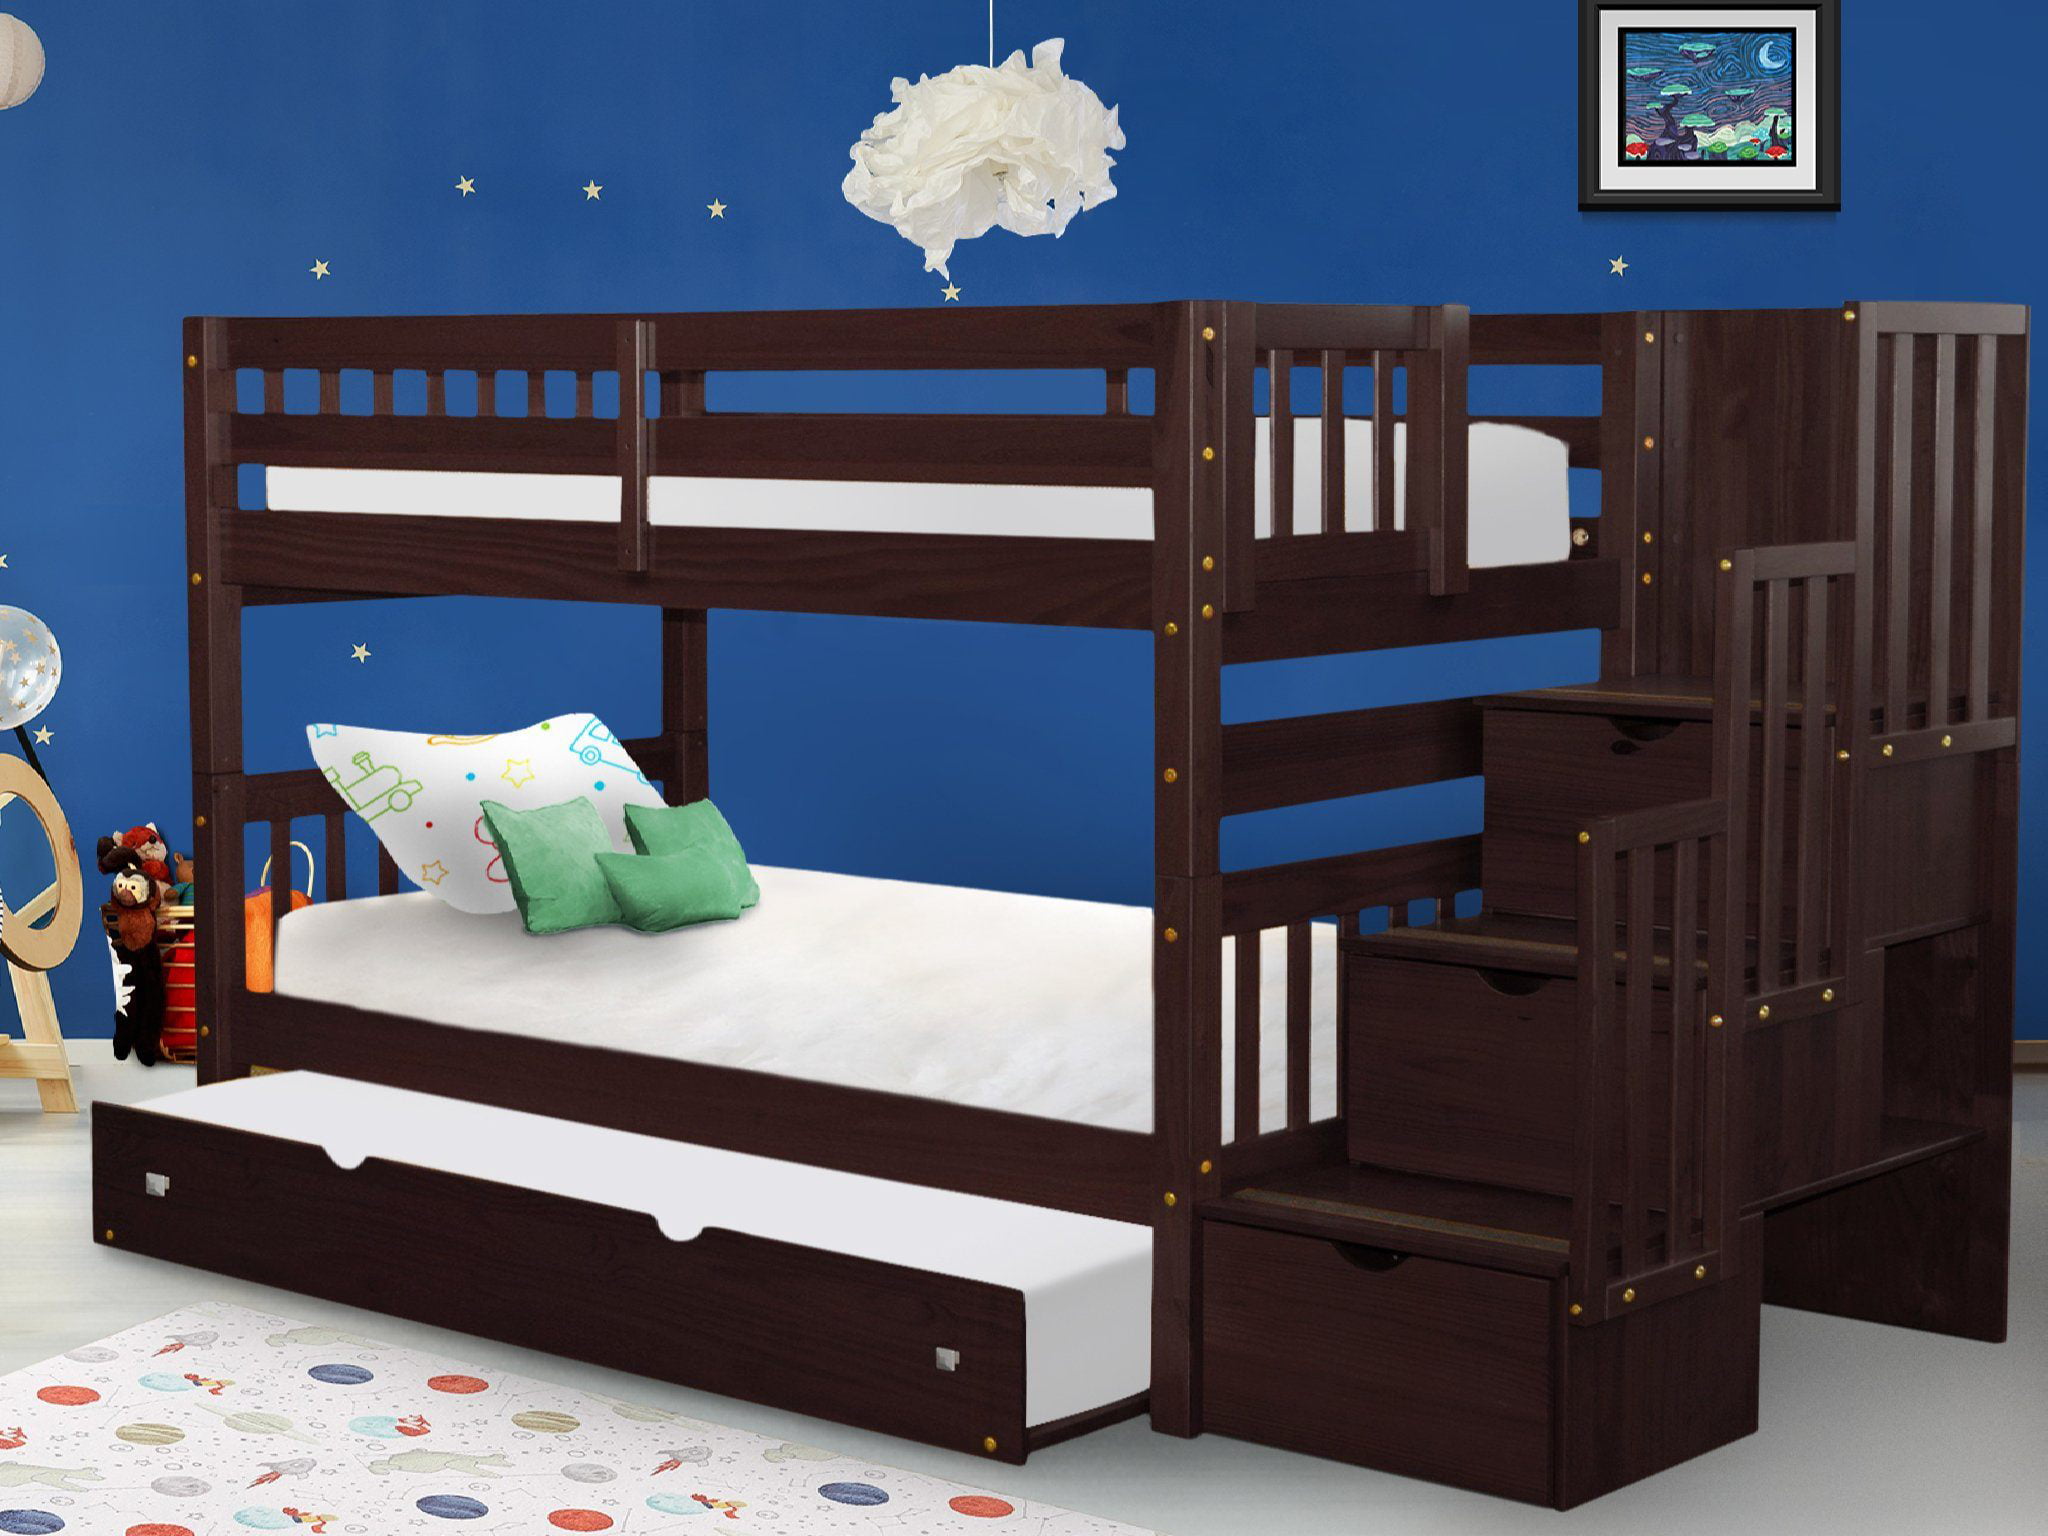 Bedz King Stairway Bunk Beds Twin Over, 3 Stacked Bunk Bed